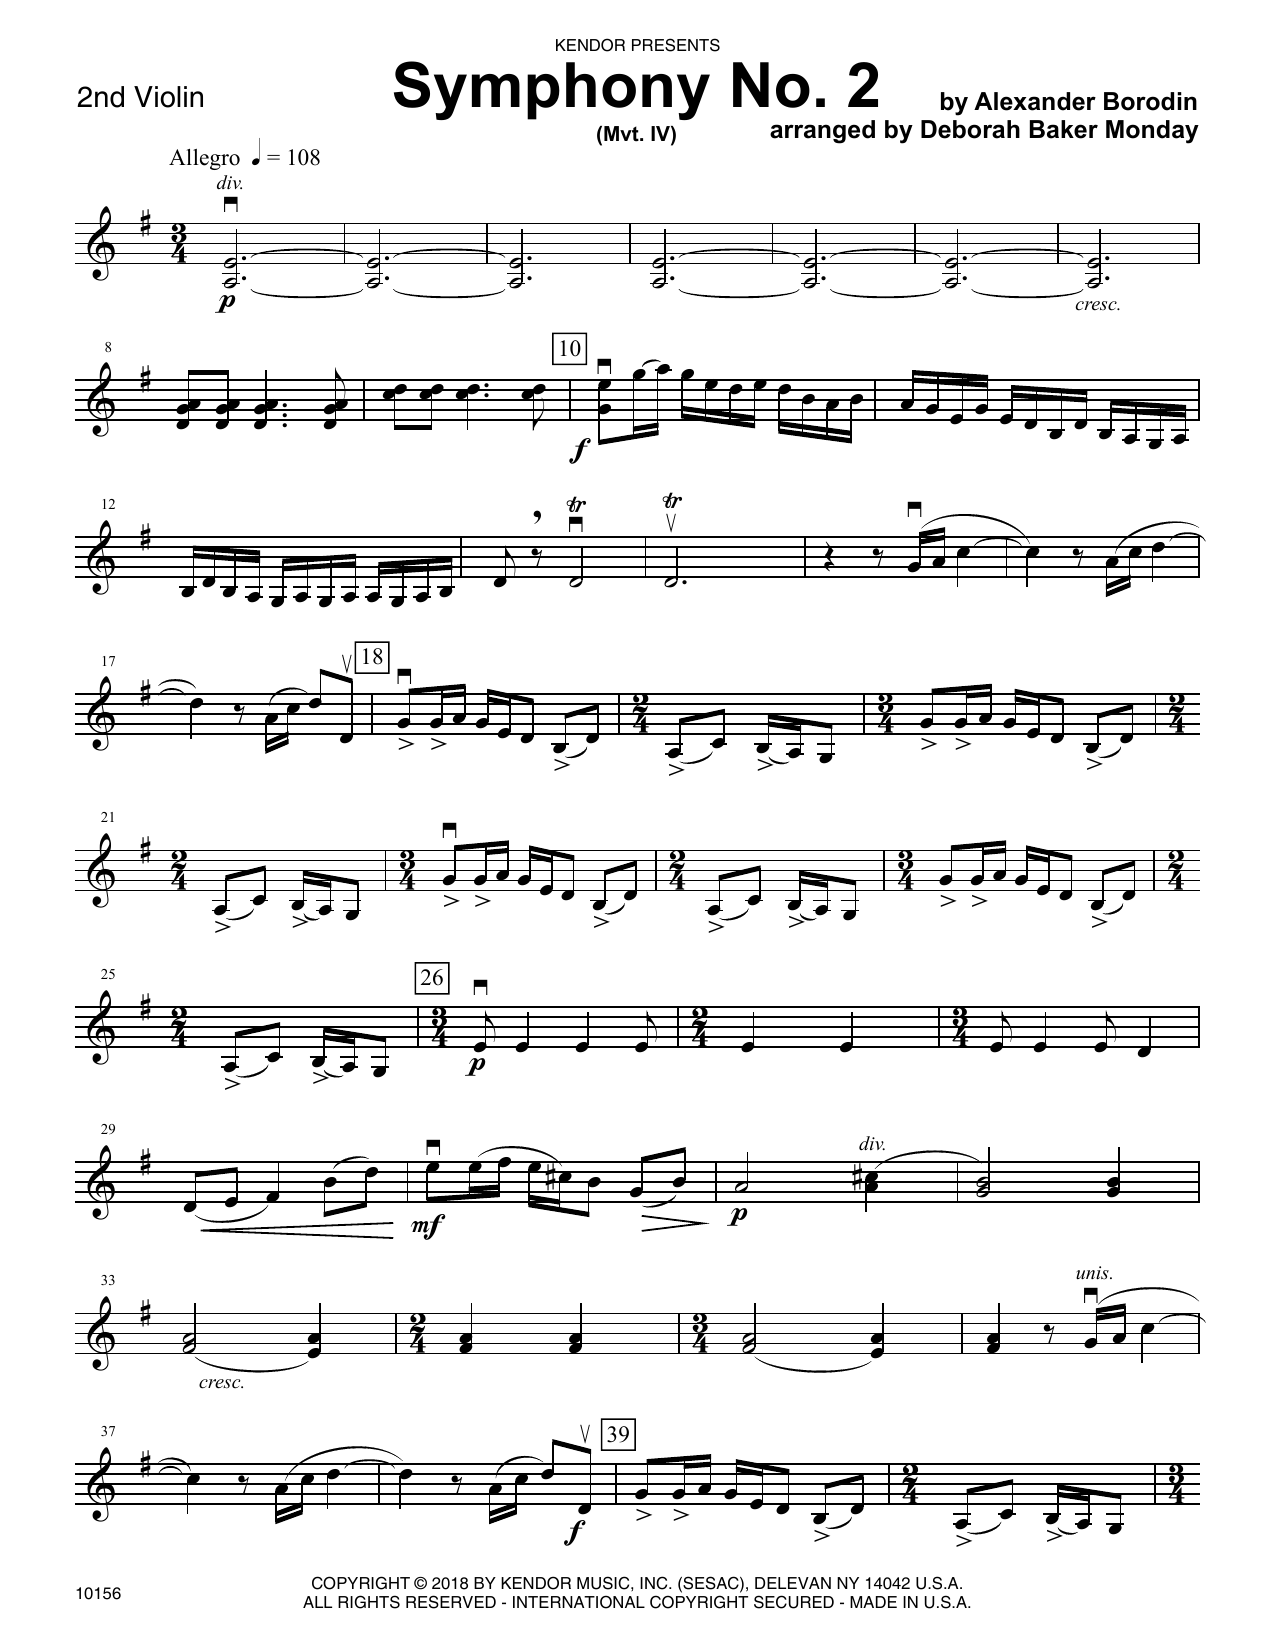 Deborah Baker Monday Symphony No. 2 (Mvt. IV) - 2nd Violin sheet music preview music notes and score for Orchestra including 4 page(s)